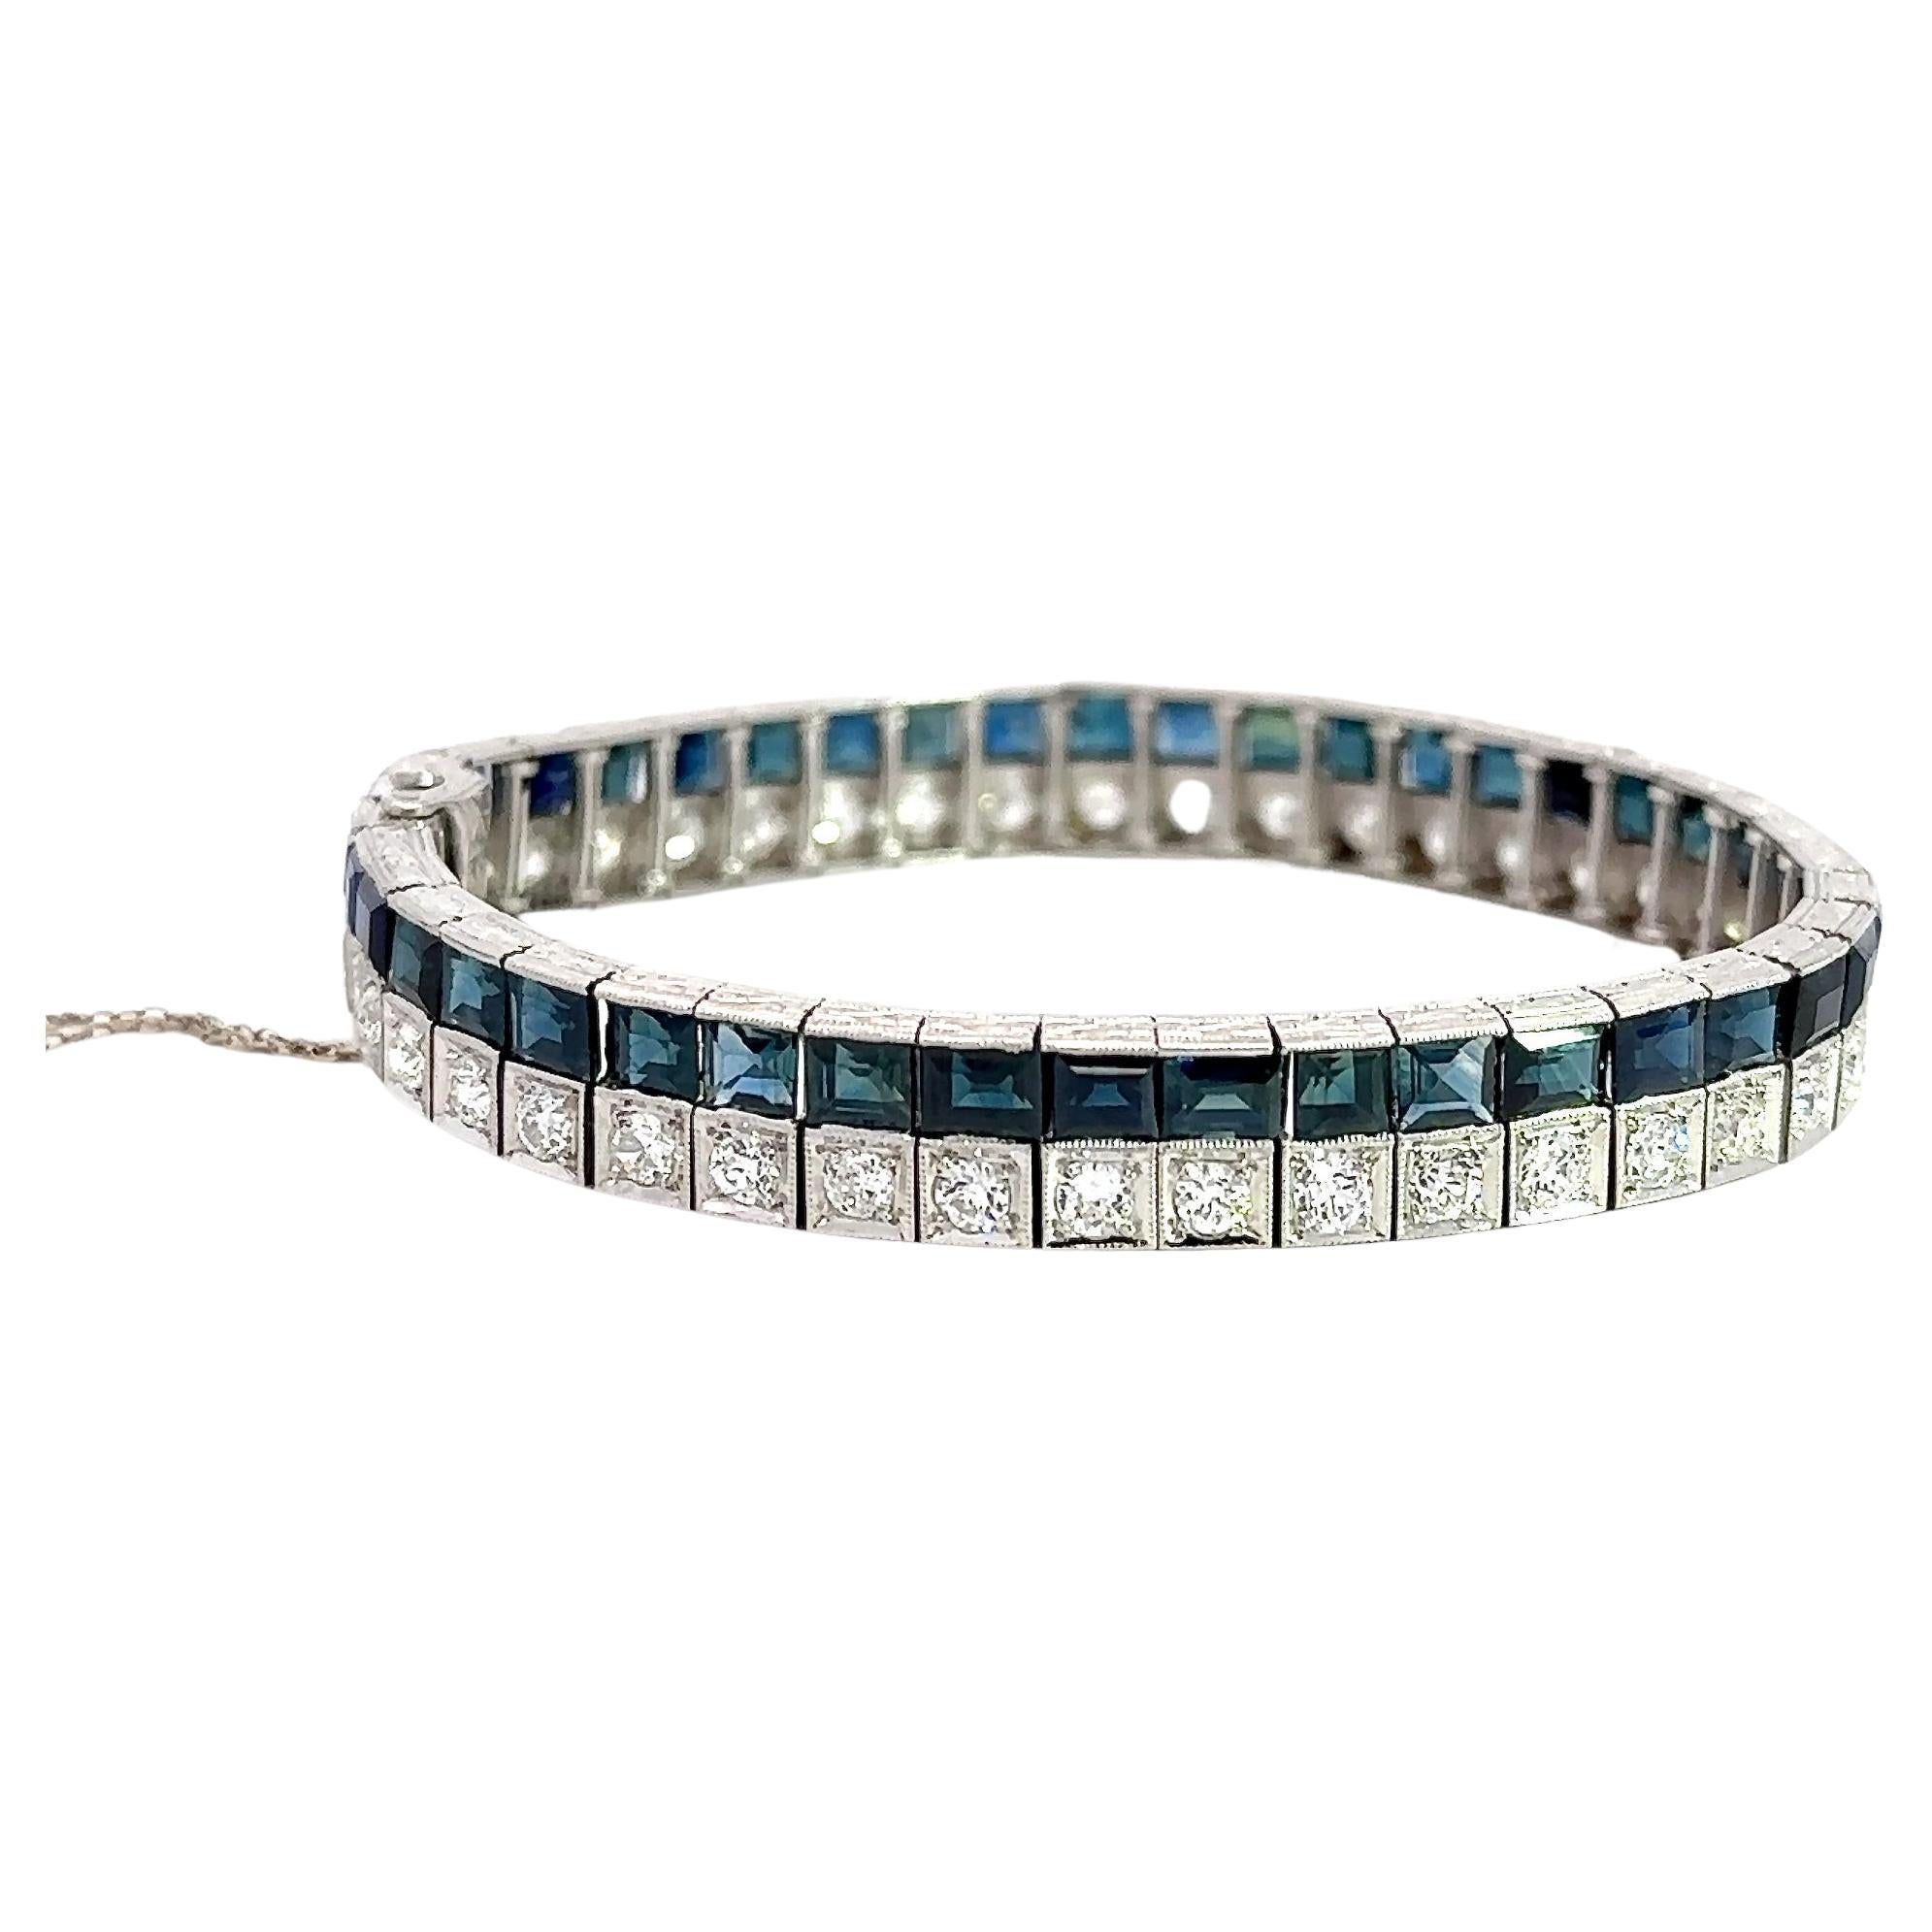 This Art Deco diamond and blue sapphire line bracelet dates from the 1930's. It contains 42 old European-cut diamonds that weigh approximately 4.5CT, H-I Color, VS-SI Clarity. It also contains 42 baguette-cut natural sapphires that weigh